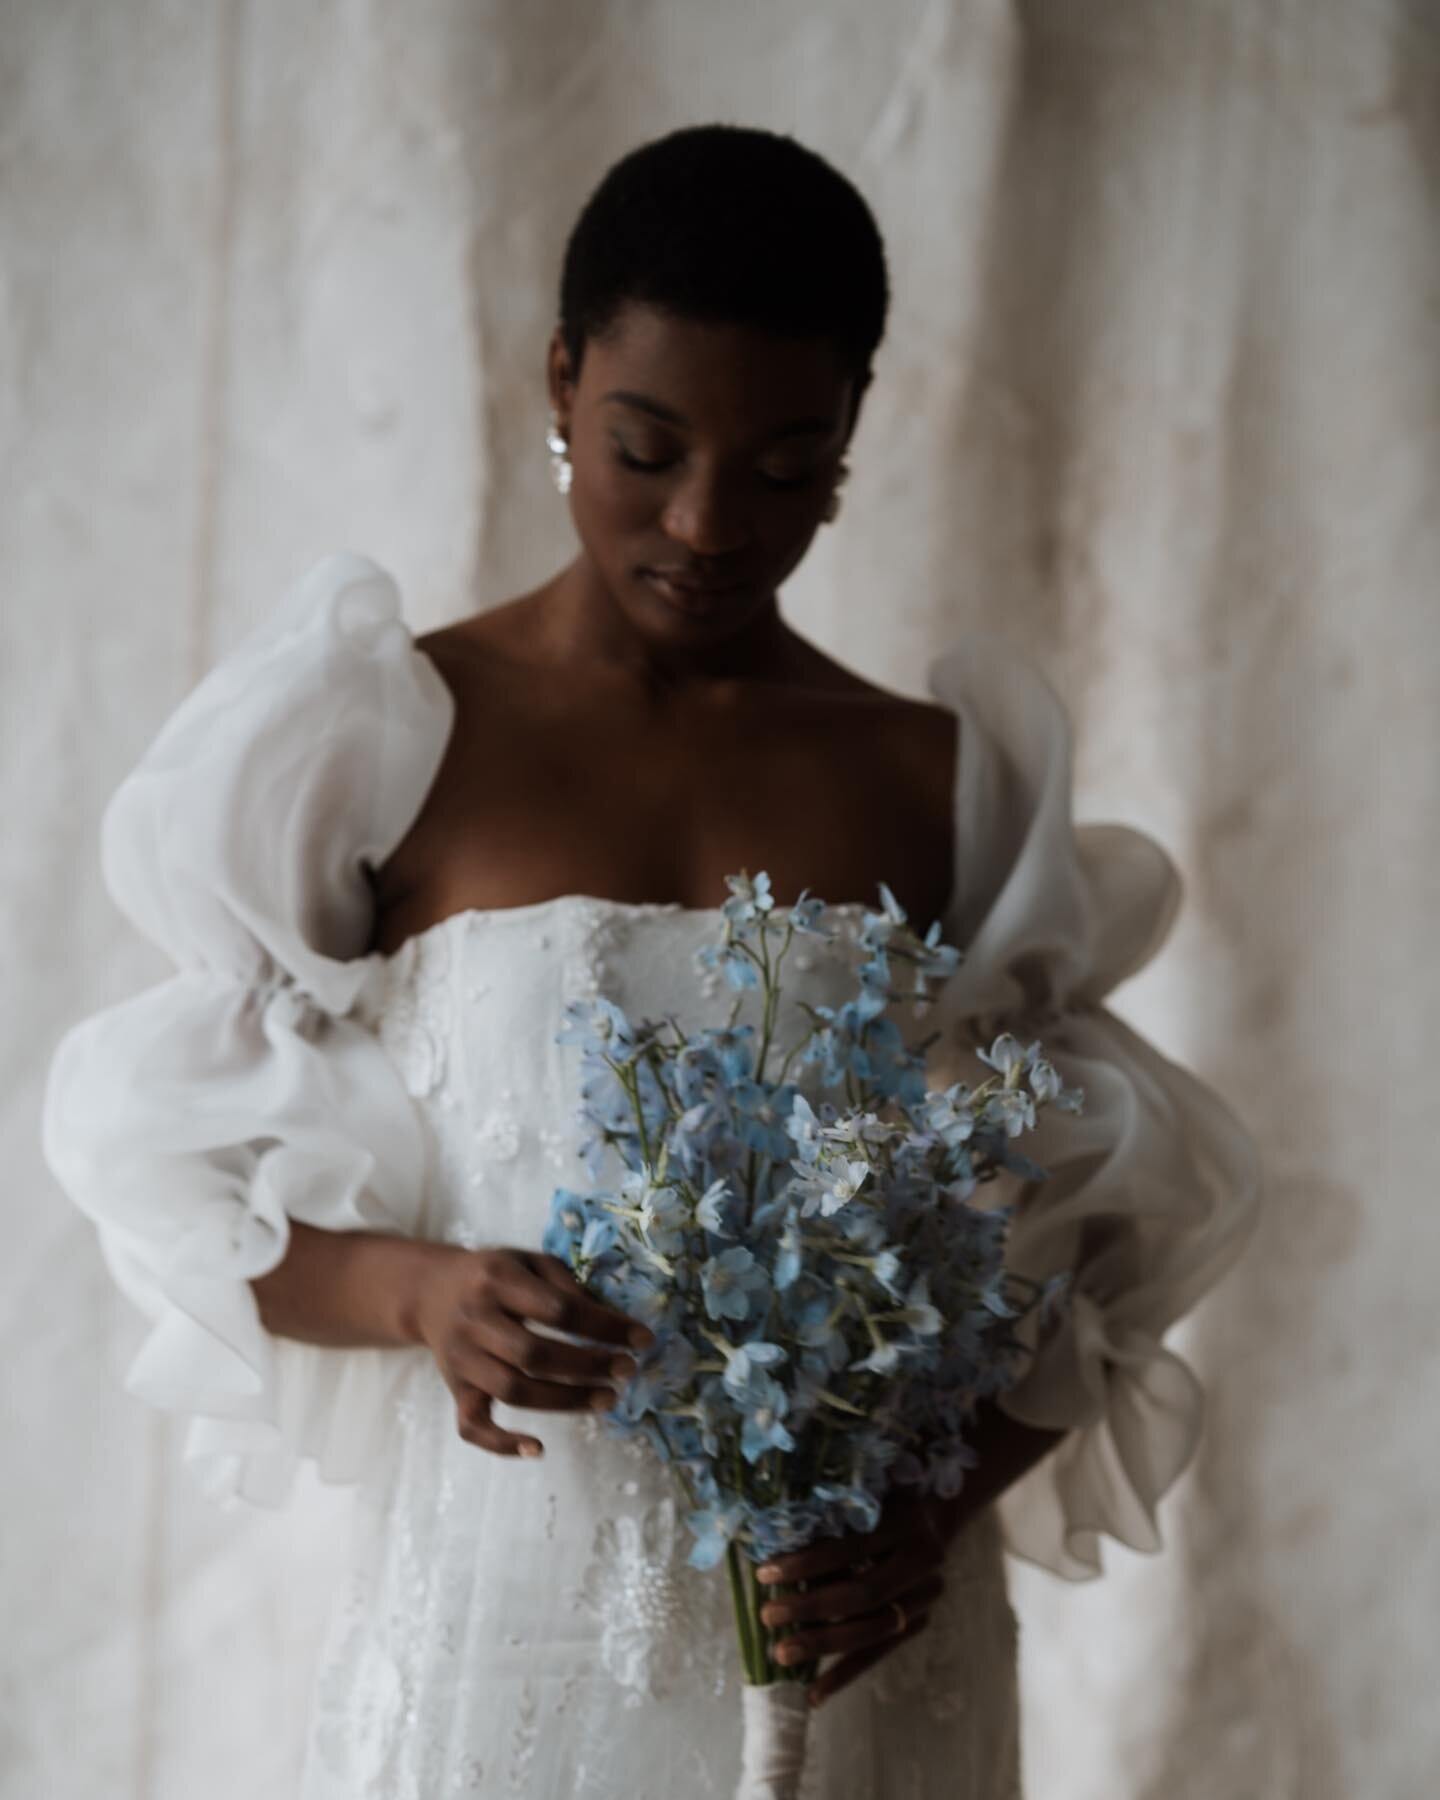 Single variety bouquets are a firm favourite at the moment. Delphinium in all their glory!

Understated beauty 🤍

Shot with a lush team of wonder women&hellip;
planning and photography @fayewildephotography
venue @shutterhousestudio
model @abi_kasim